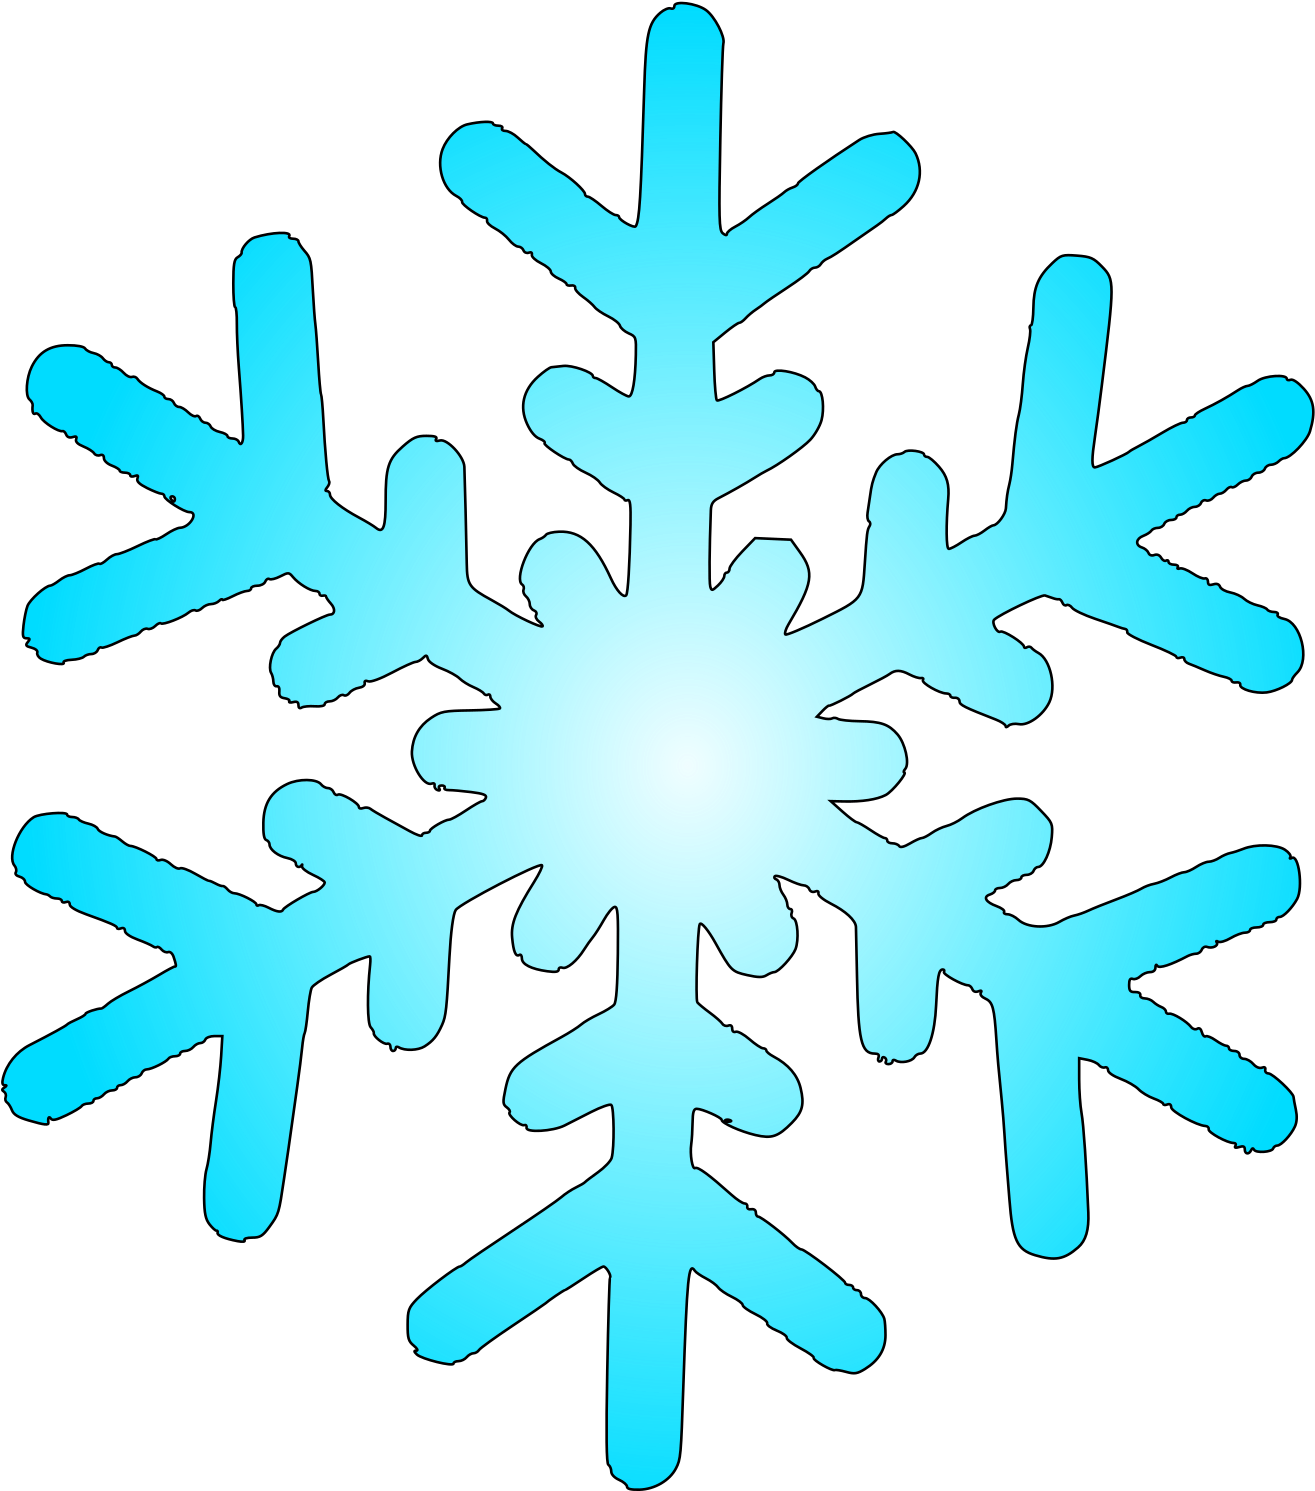 Snowflake Clipart Flake - Words To Describe Winter (2124x2400)